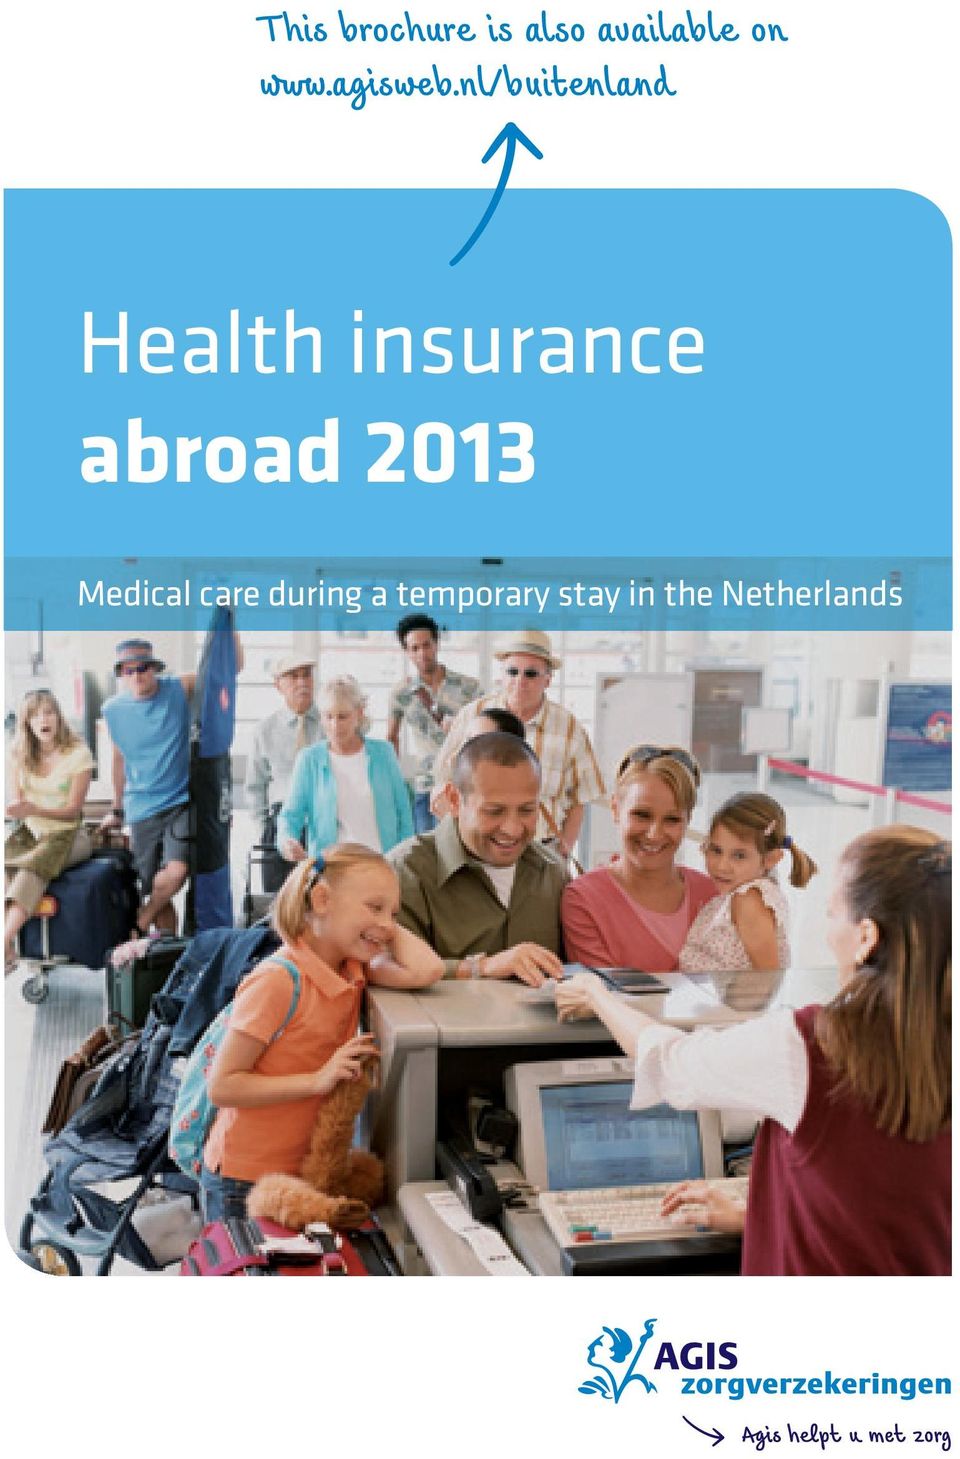 nl/buitenland Health insurance abroad